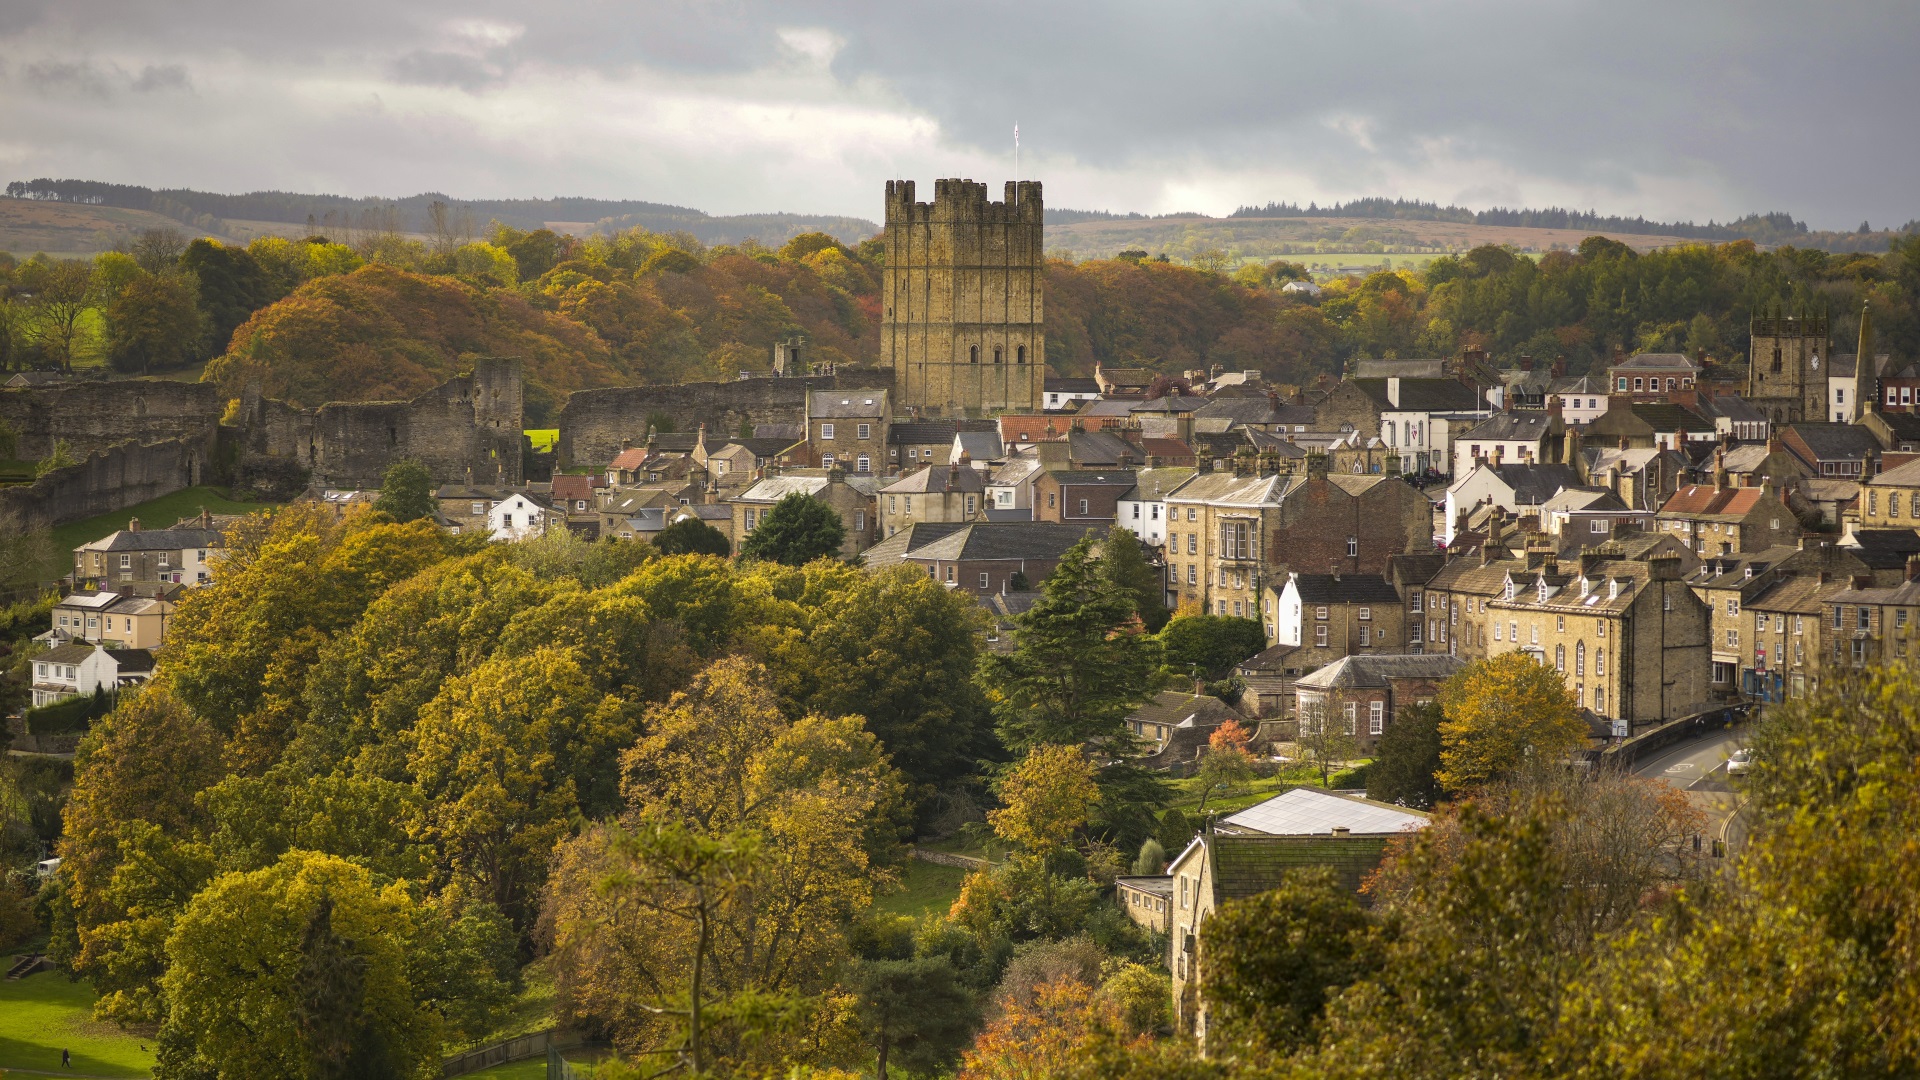 The historic and quaint market town of Richmond, North Yorkshire, in the heart of Rishi Sunak’s constituency – widely regarded as one of the safest Tory seats in the country. Photo: Christopher Furlong/Getty